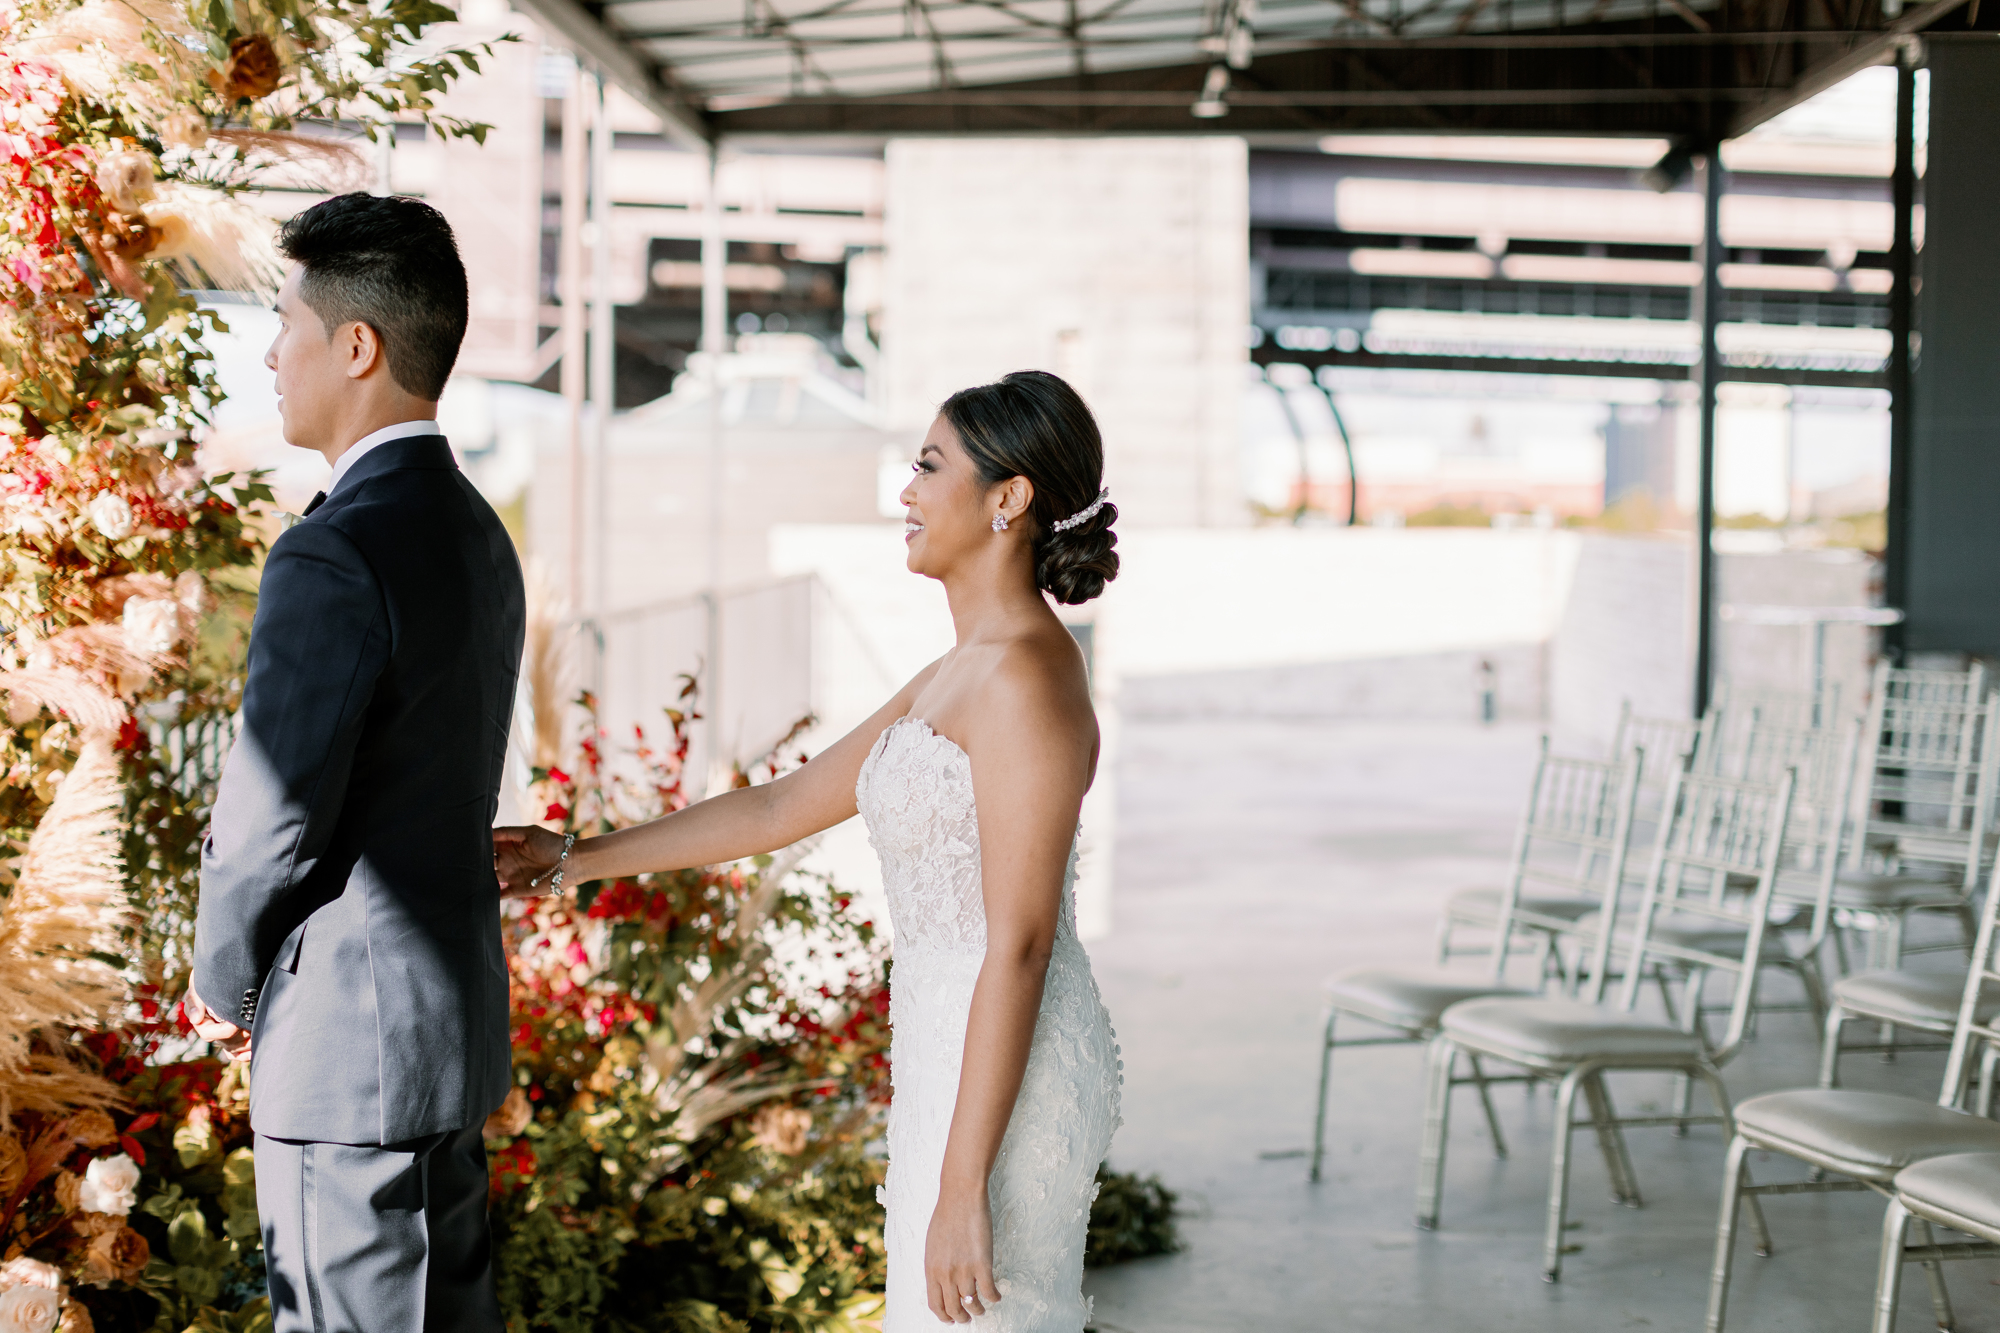 Ravel Hotel wedding with floral decor